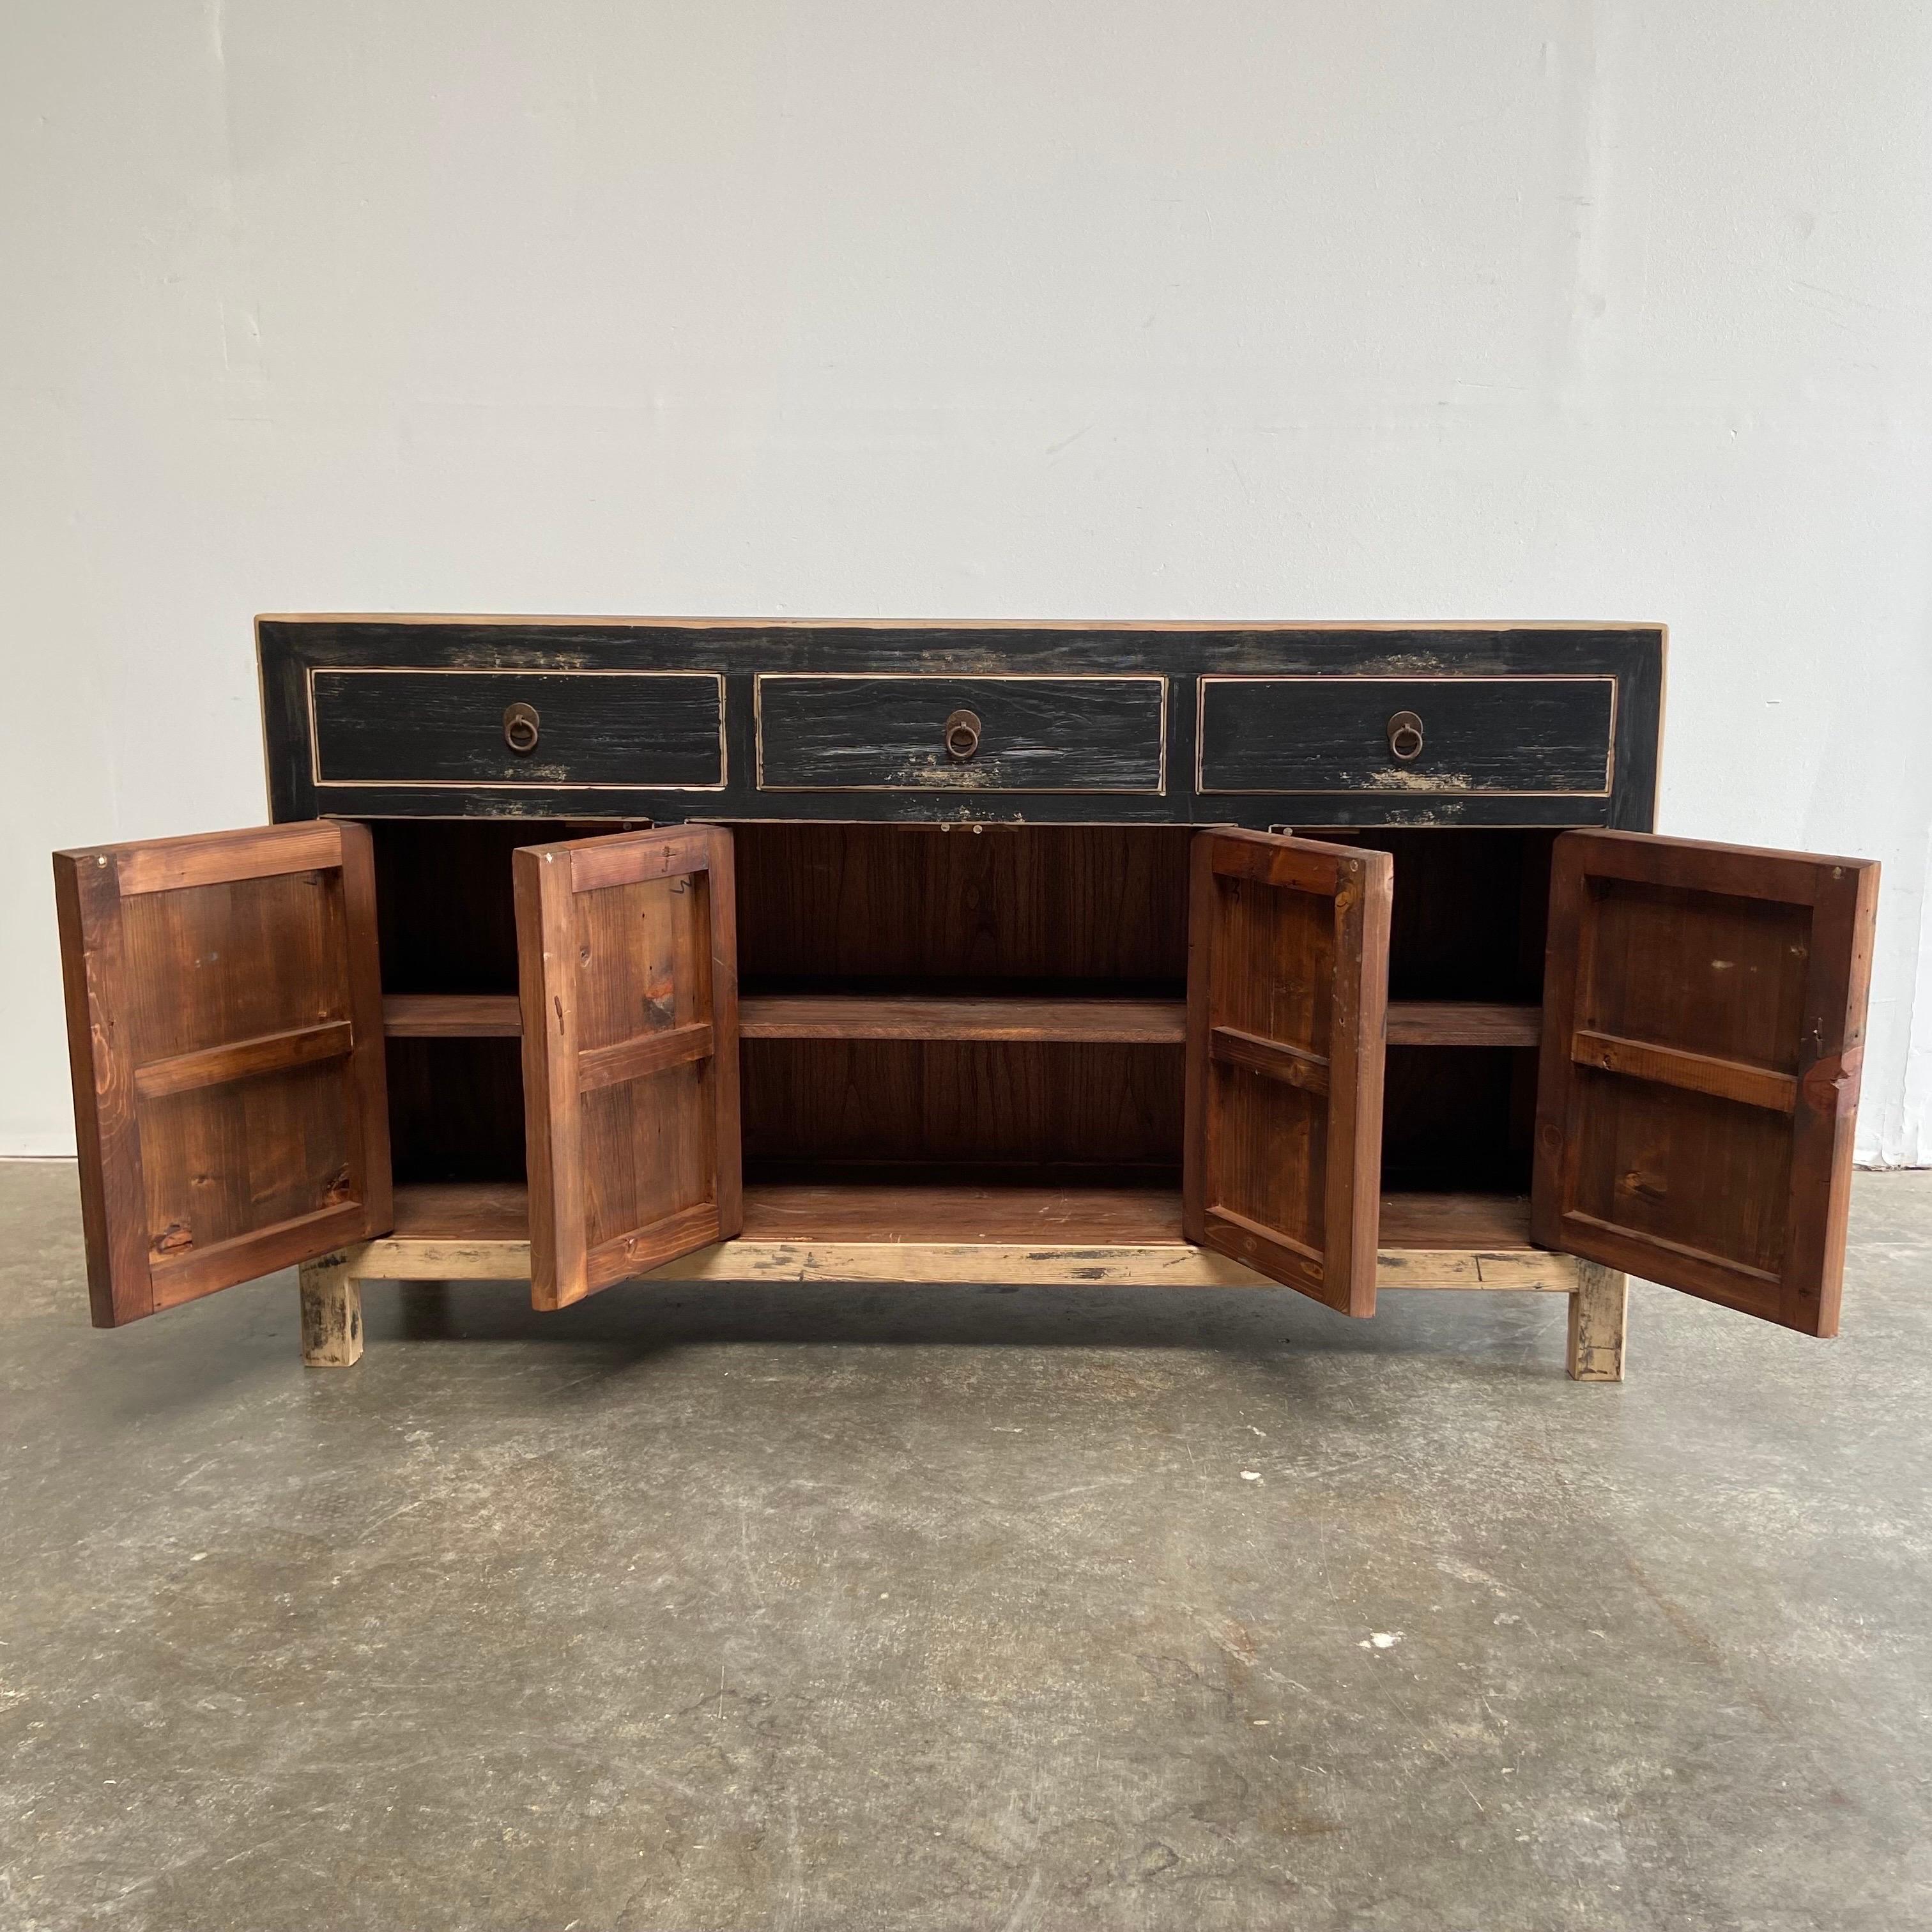 Vintage reclaimed elm wood 4 door, 3 drawer black distressed painted console. Perfect for an entry, use as a bar, in a dining room, or as a tv console. 
Doors open up with ease.
Size: 63”w x 16”d x 36”h.